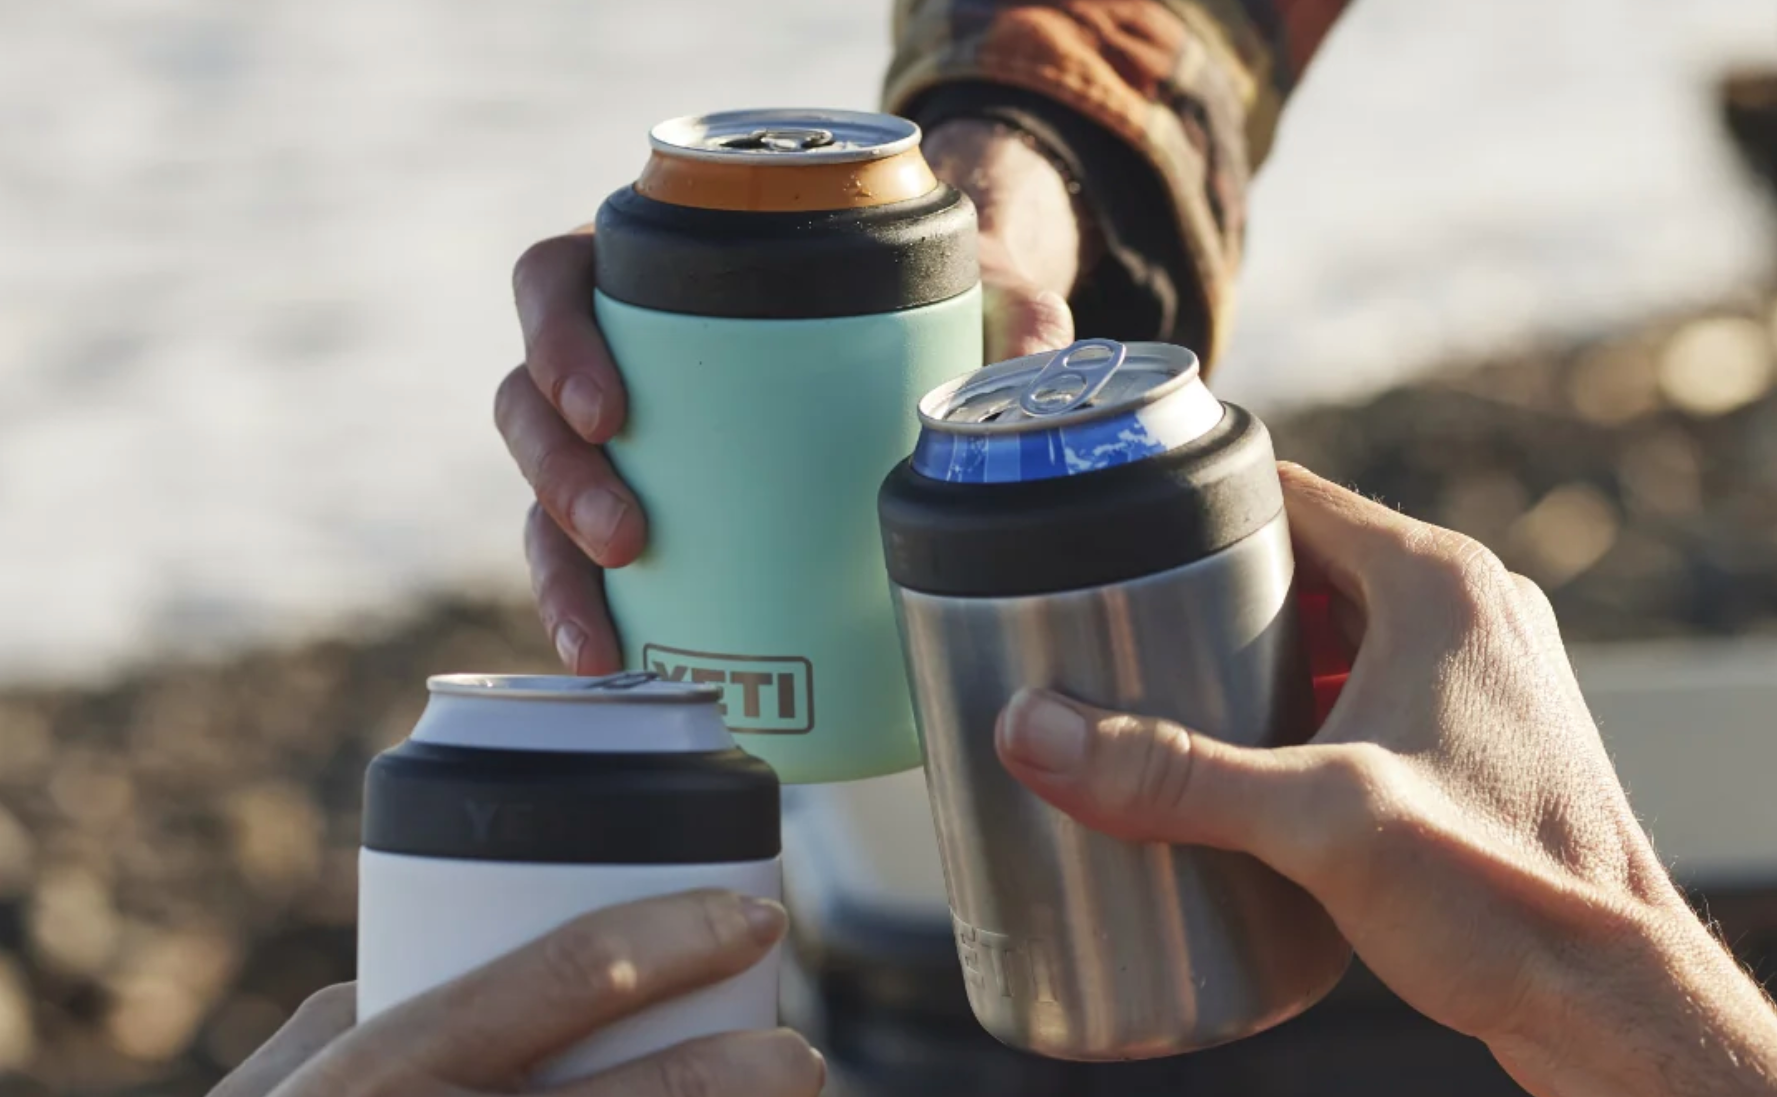 Prime Day Yeti Deals 2023: Grab These Insulated Products At a Discount